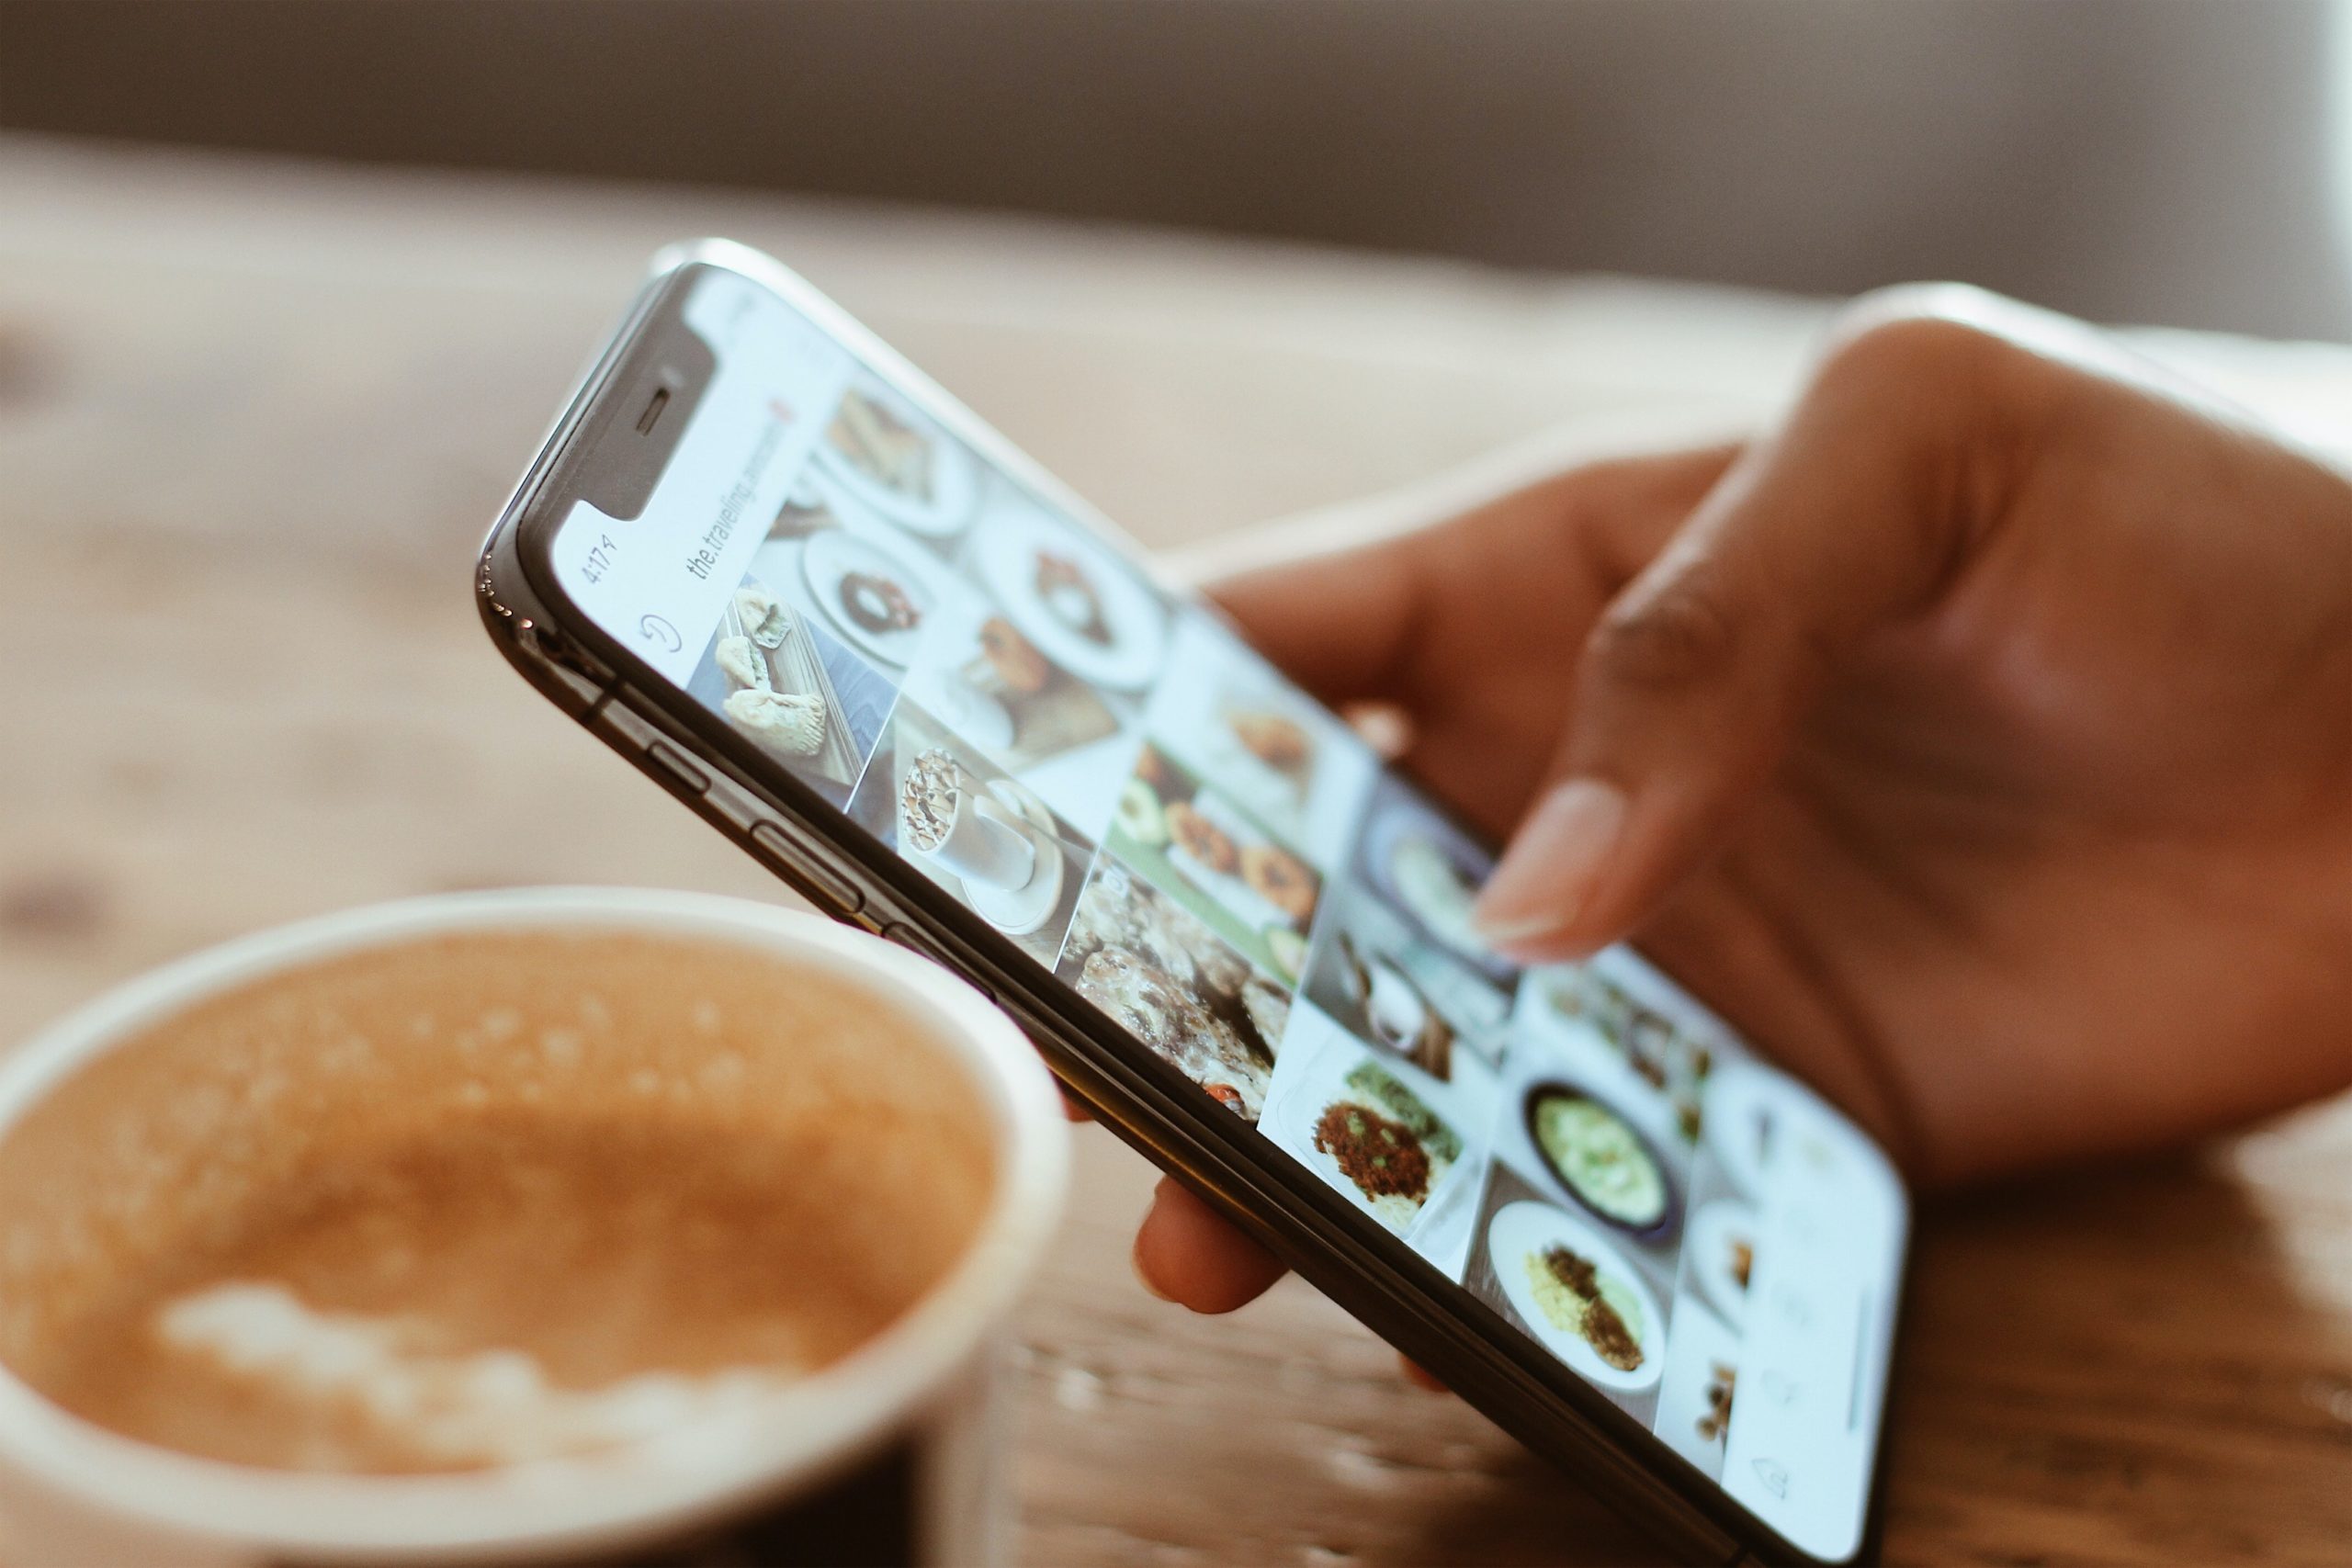 A close-up of a person scrolling through Instagram on their phone next to a cup of coffee